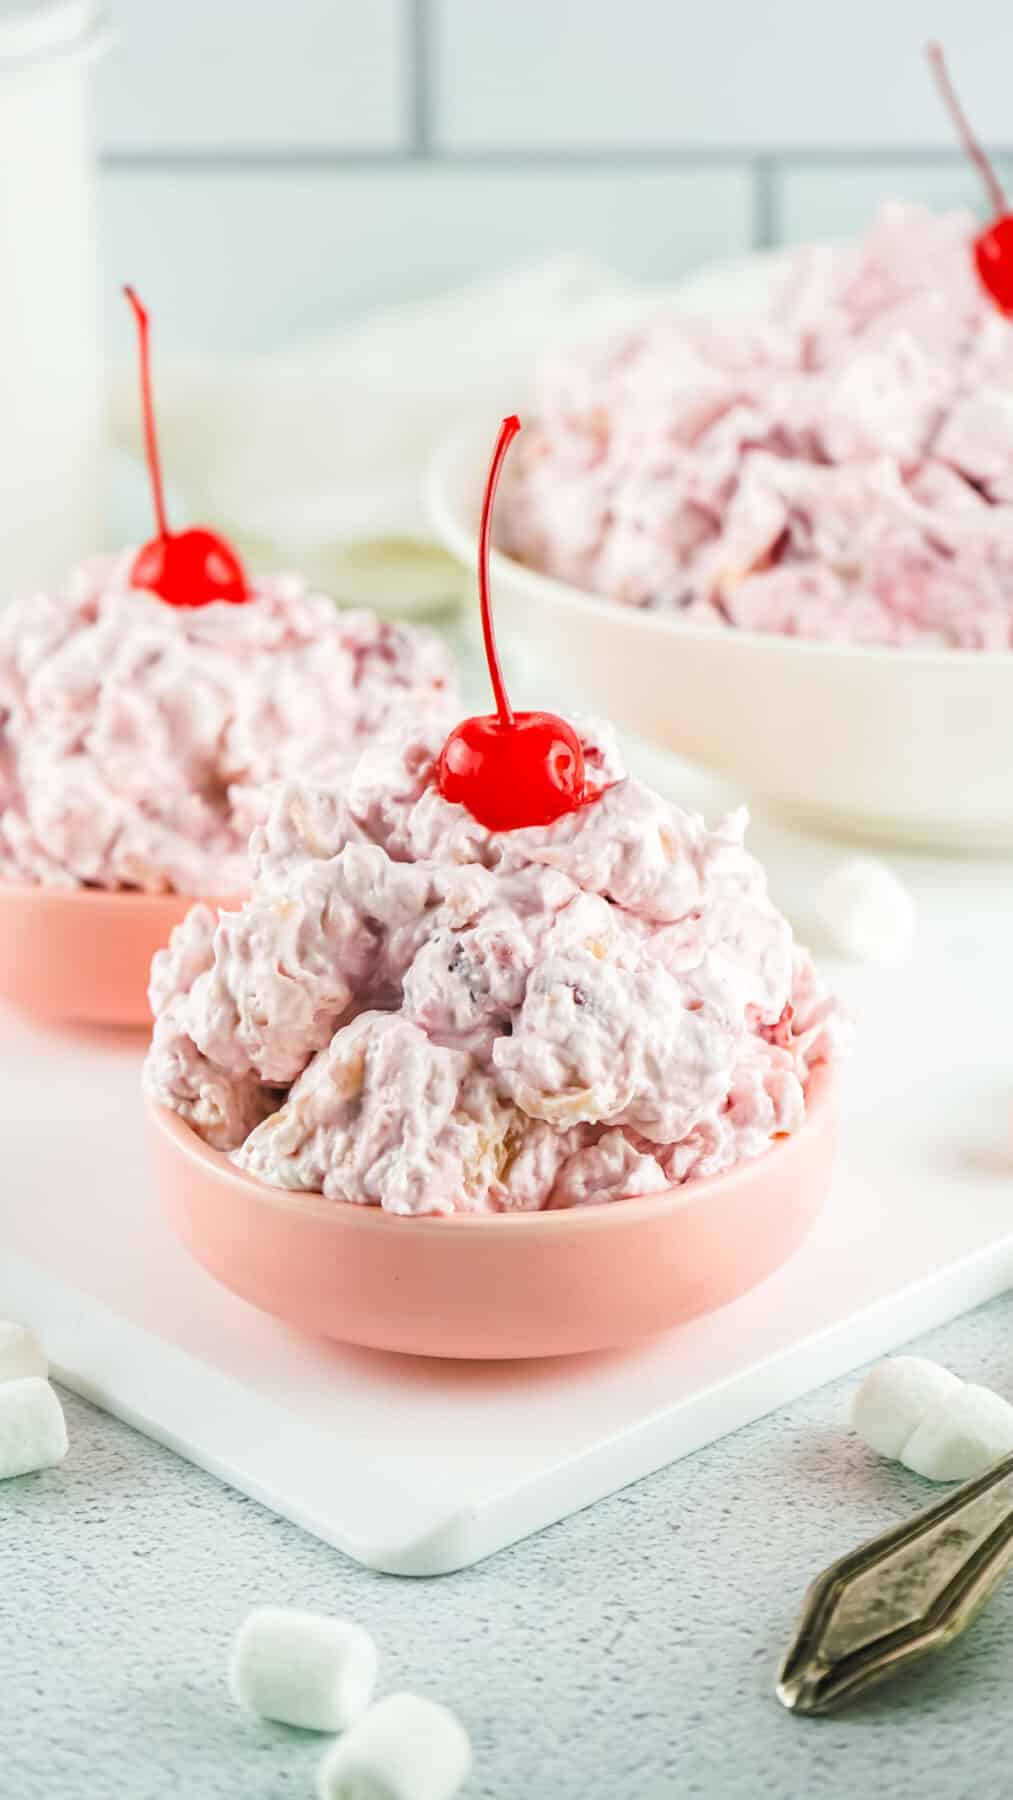 Cherry fluff salad in a small pink bowl.